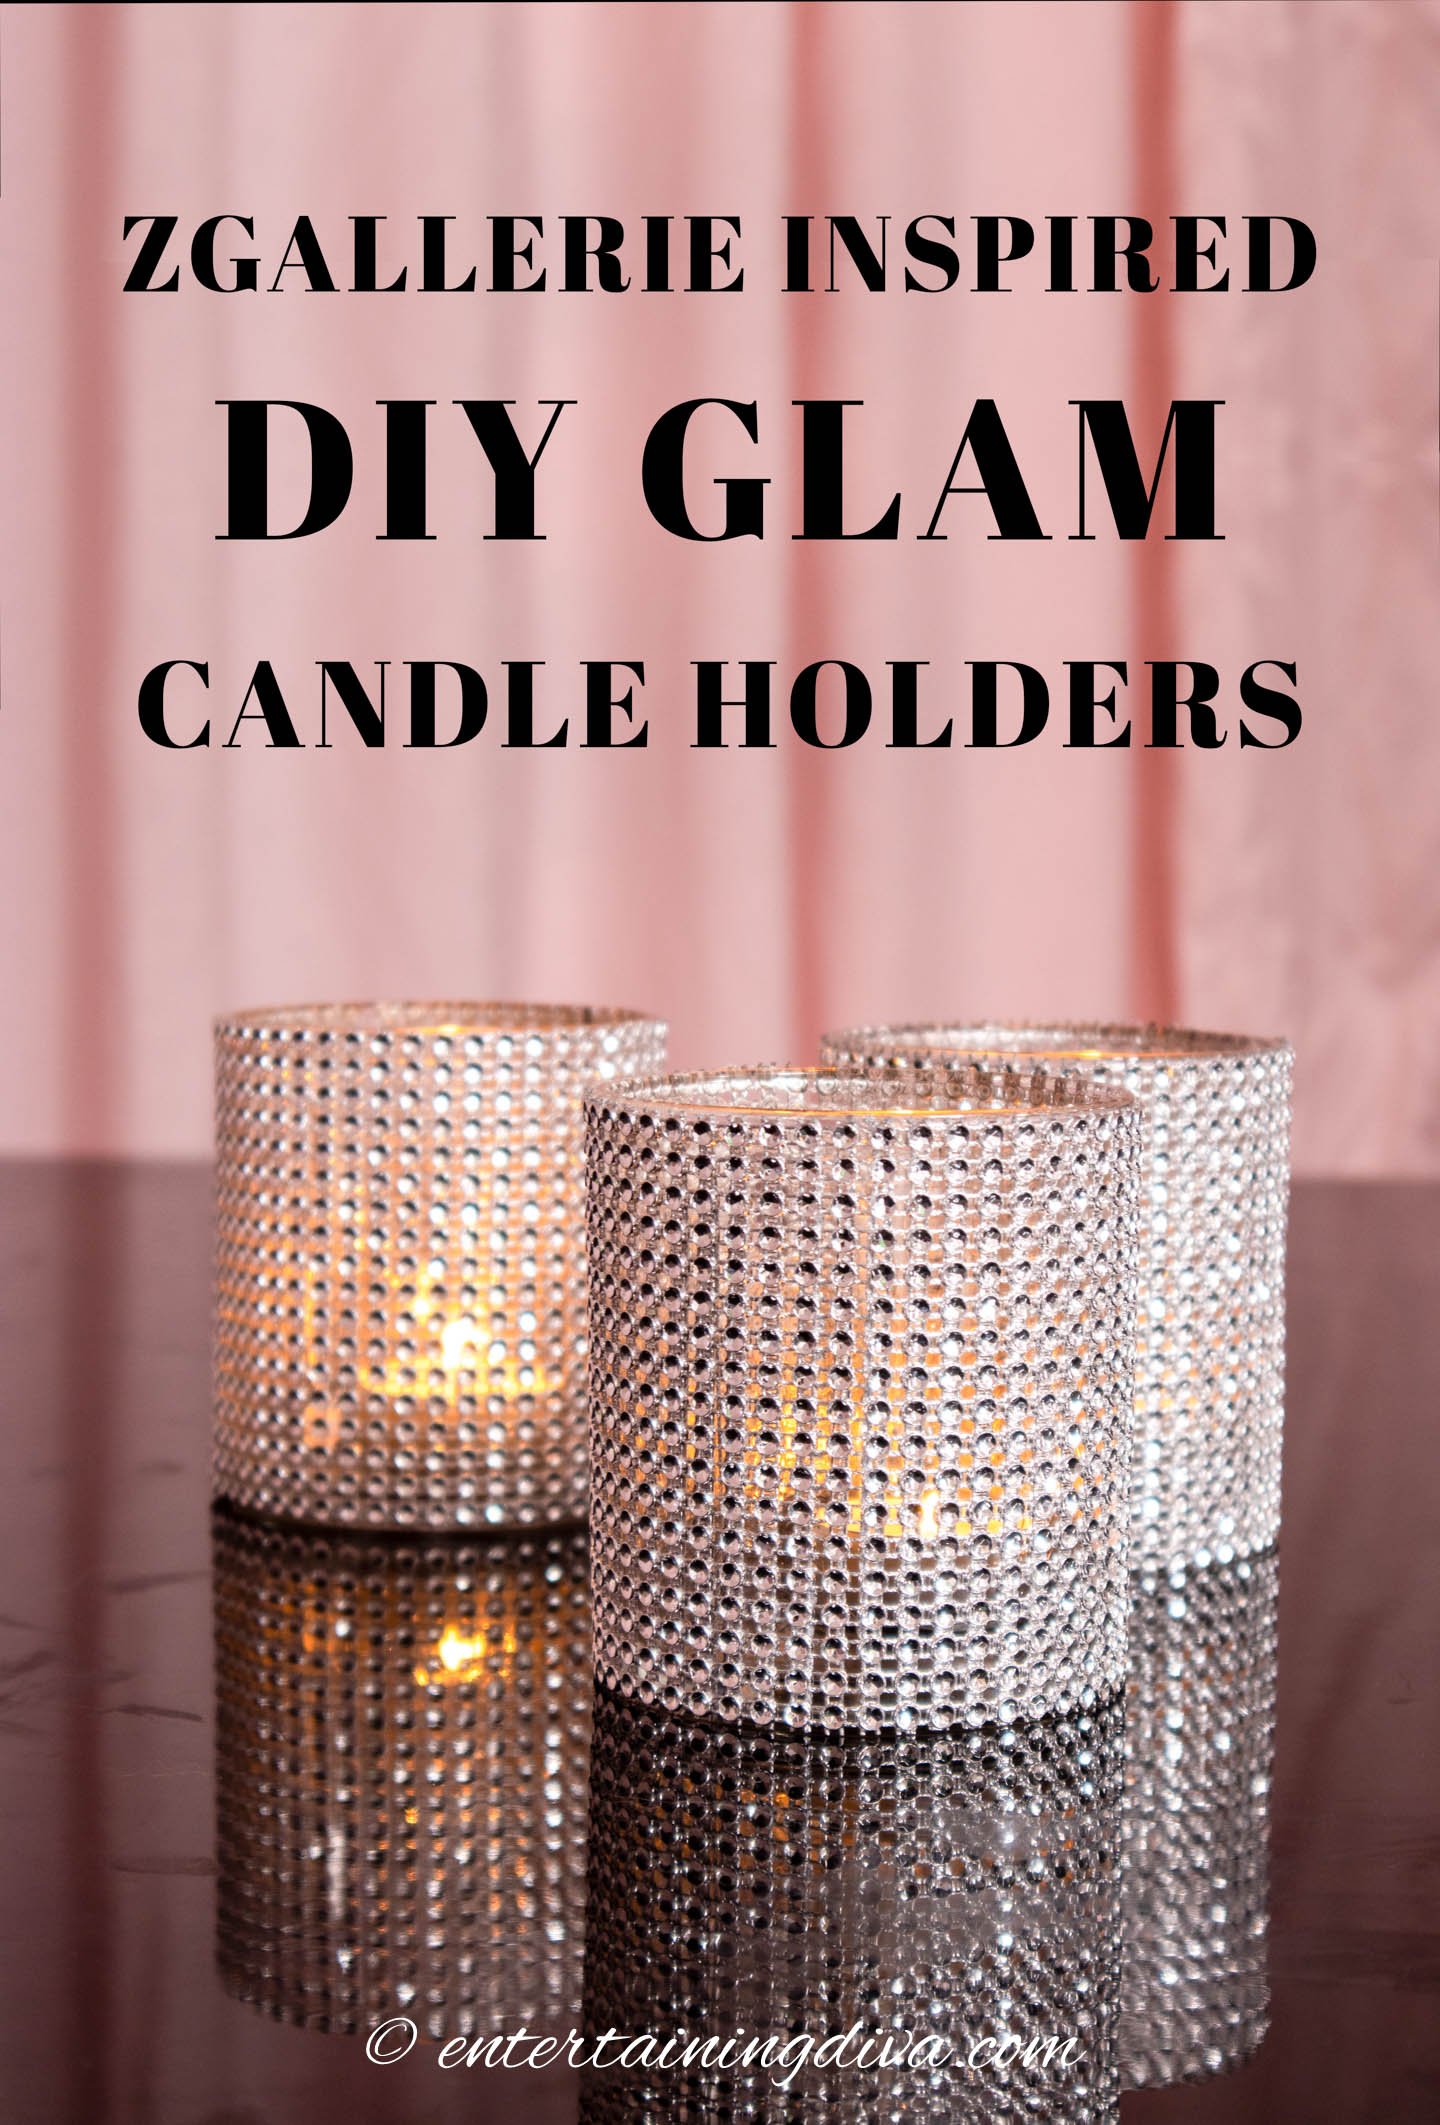 ZGallerie inspired DIY glam candle holders